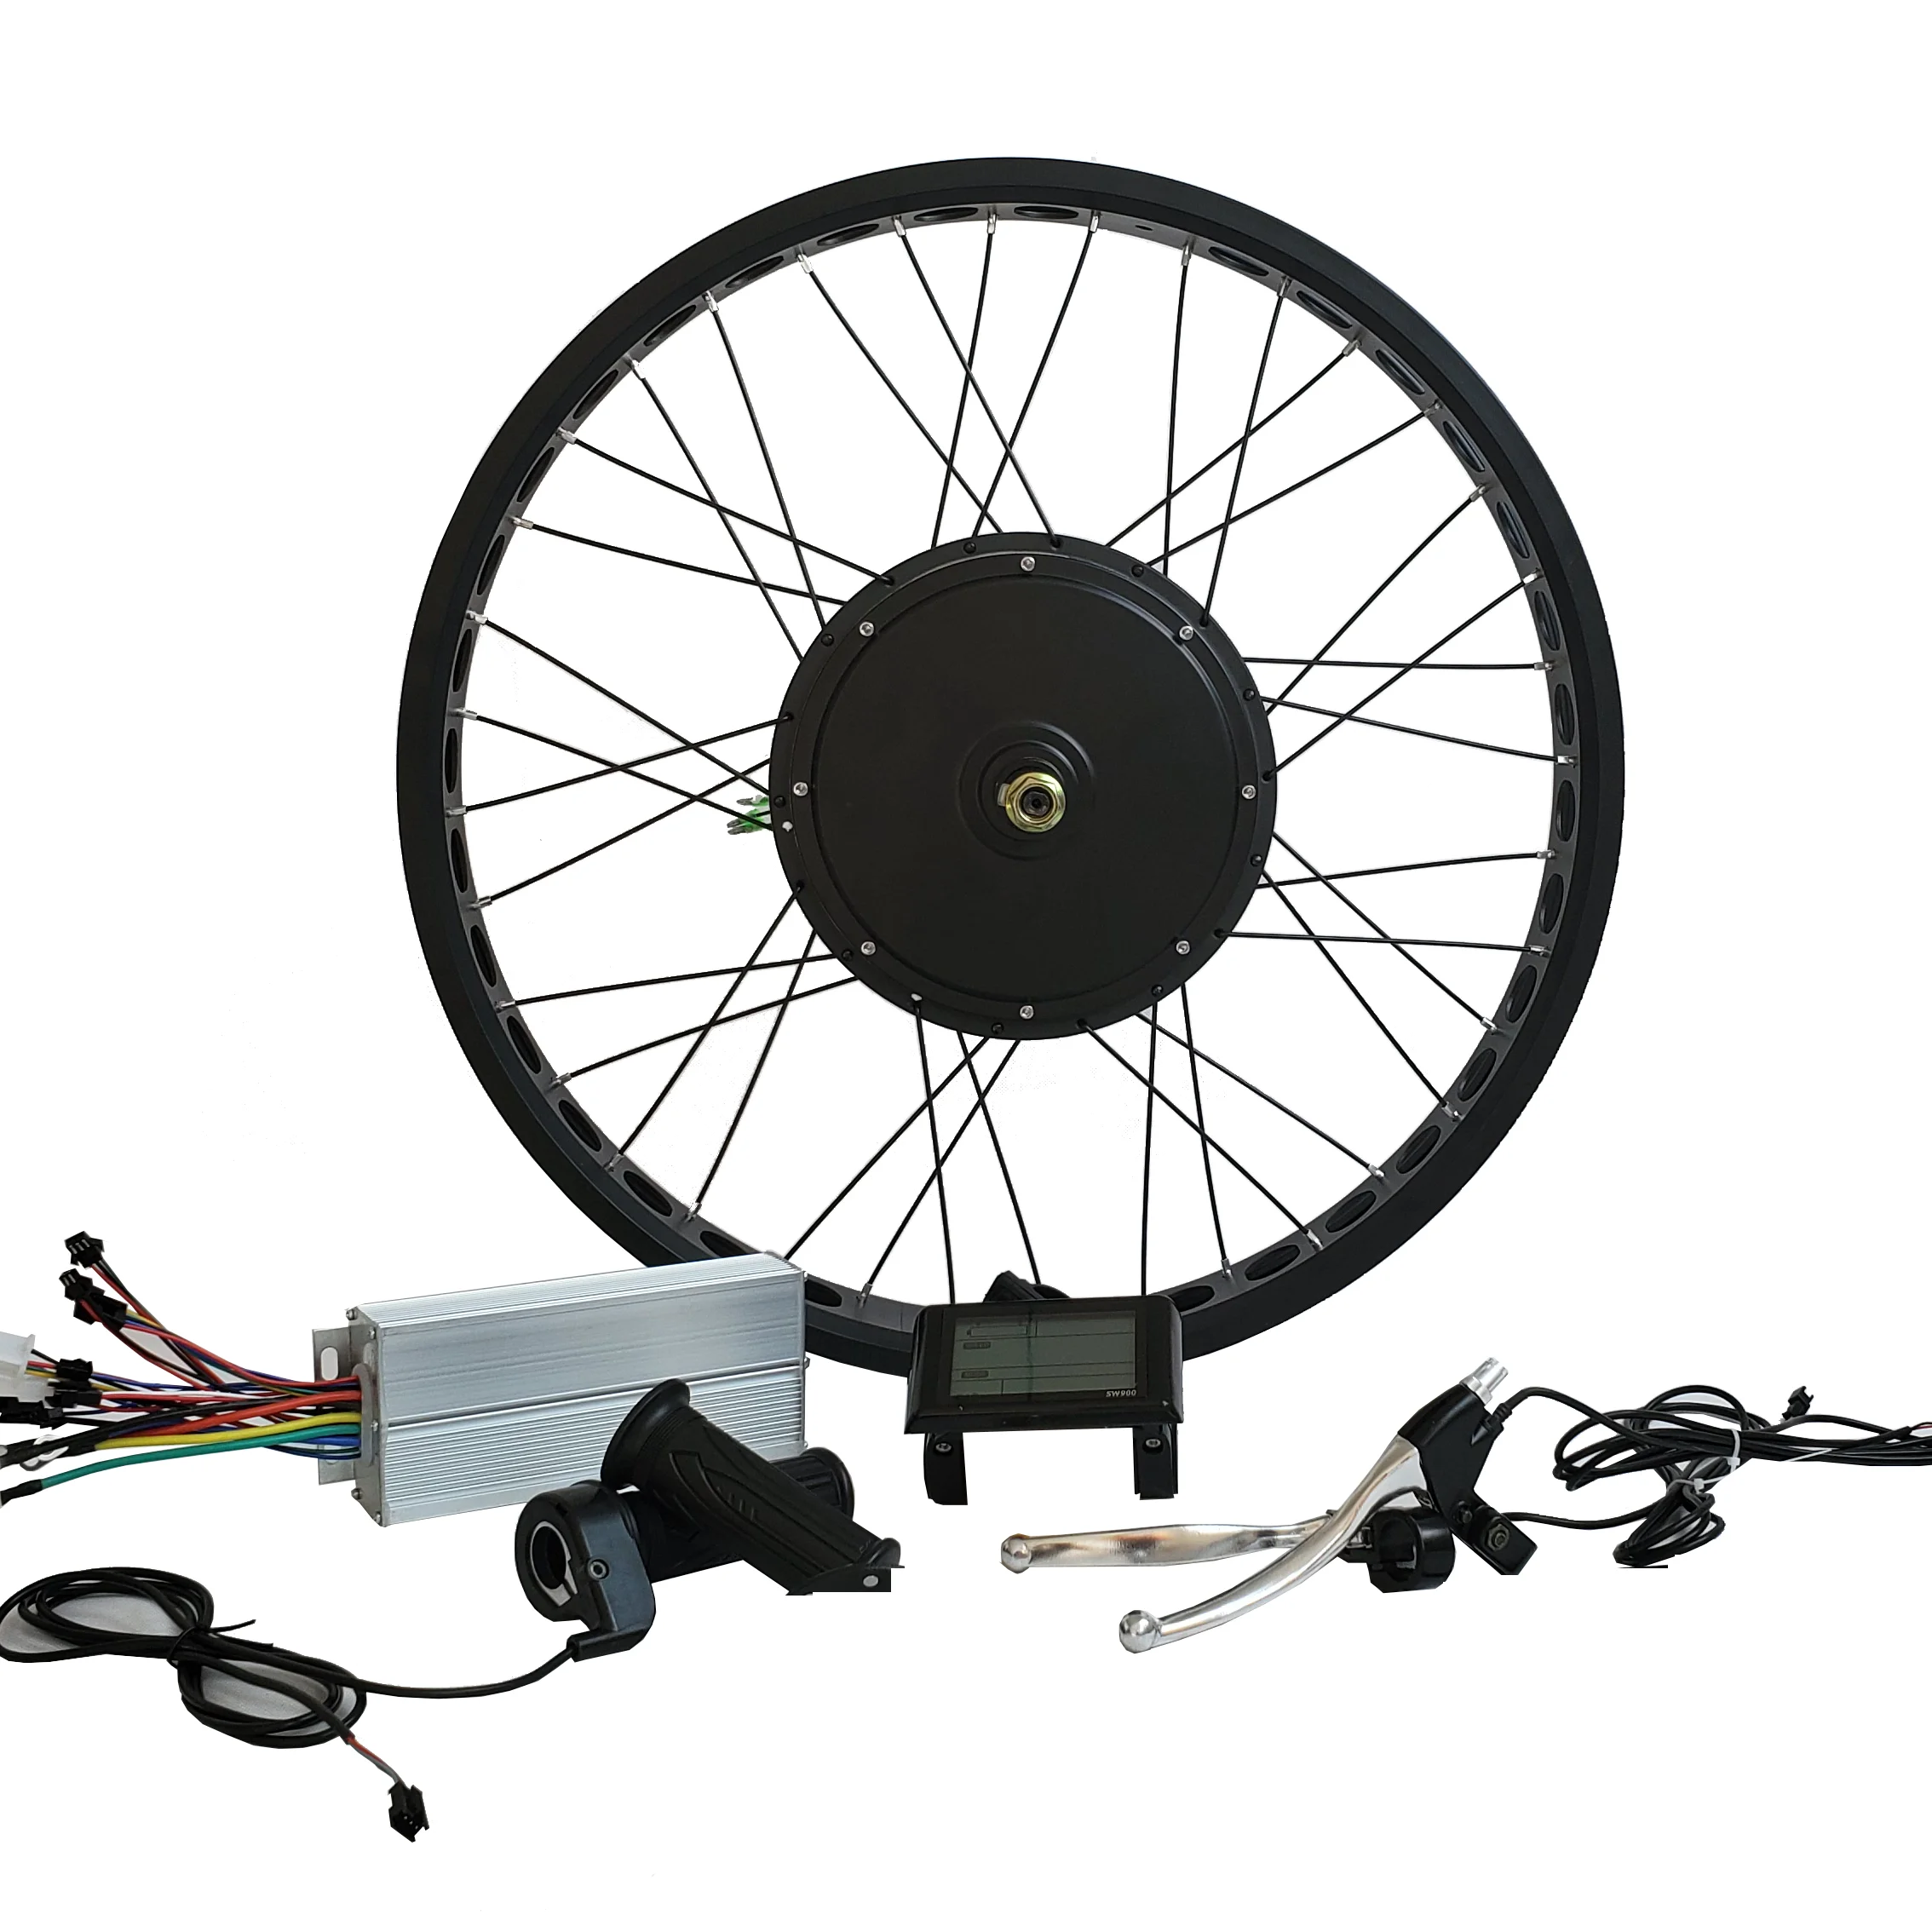 

3kw bldc motor High Quality 3000w Electric motor motorcycle conversion Kit, Black